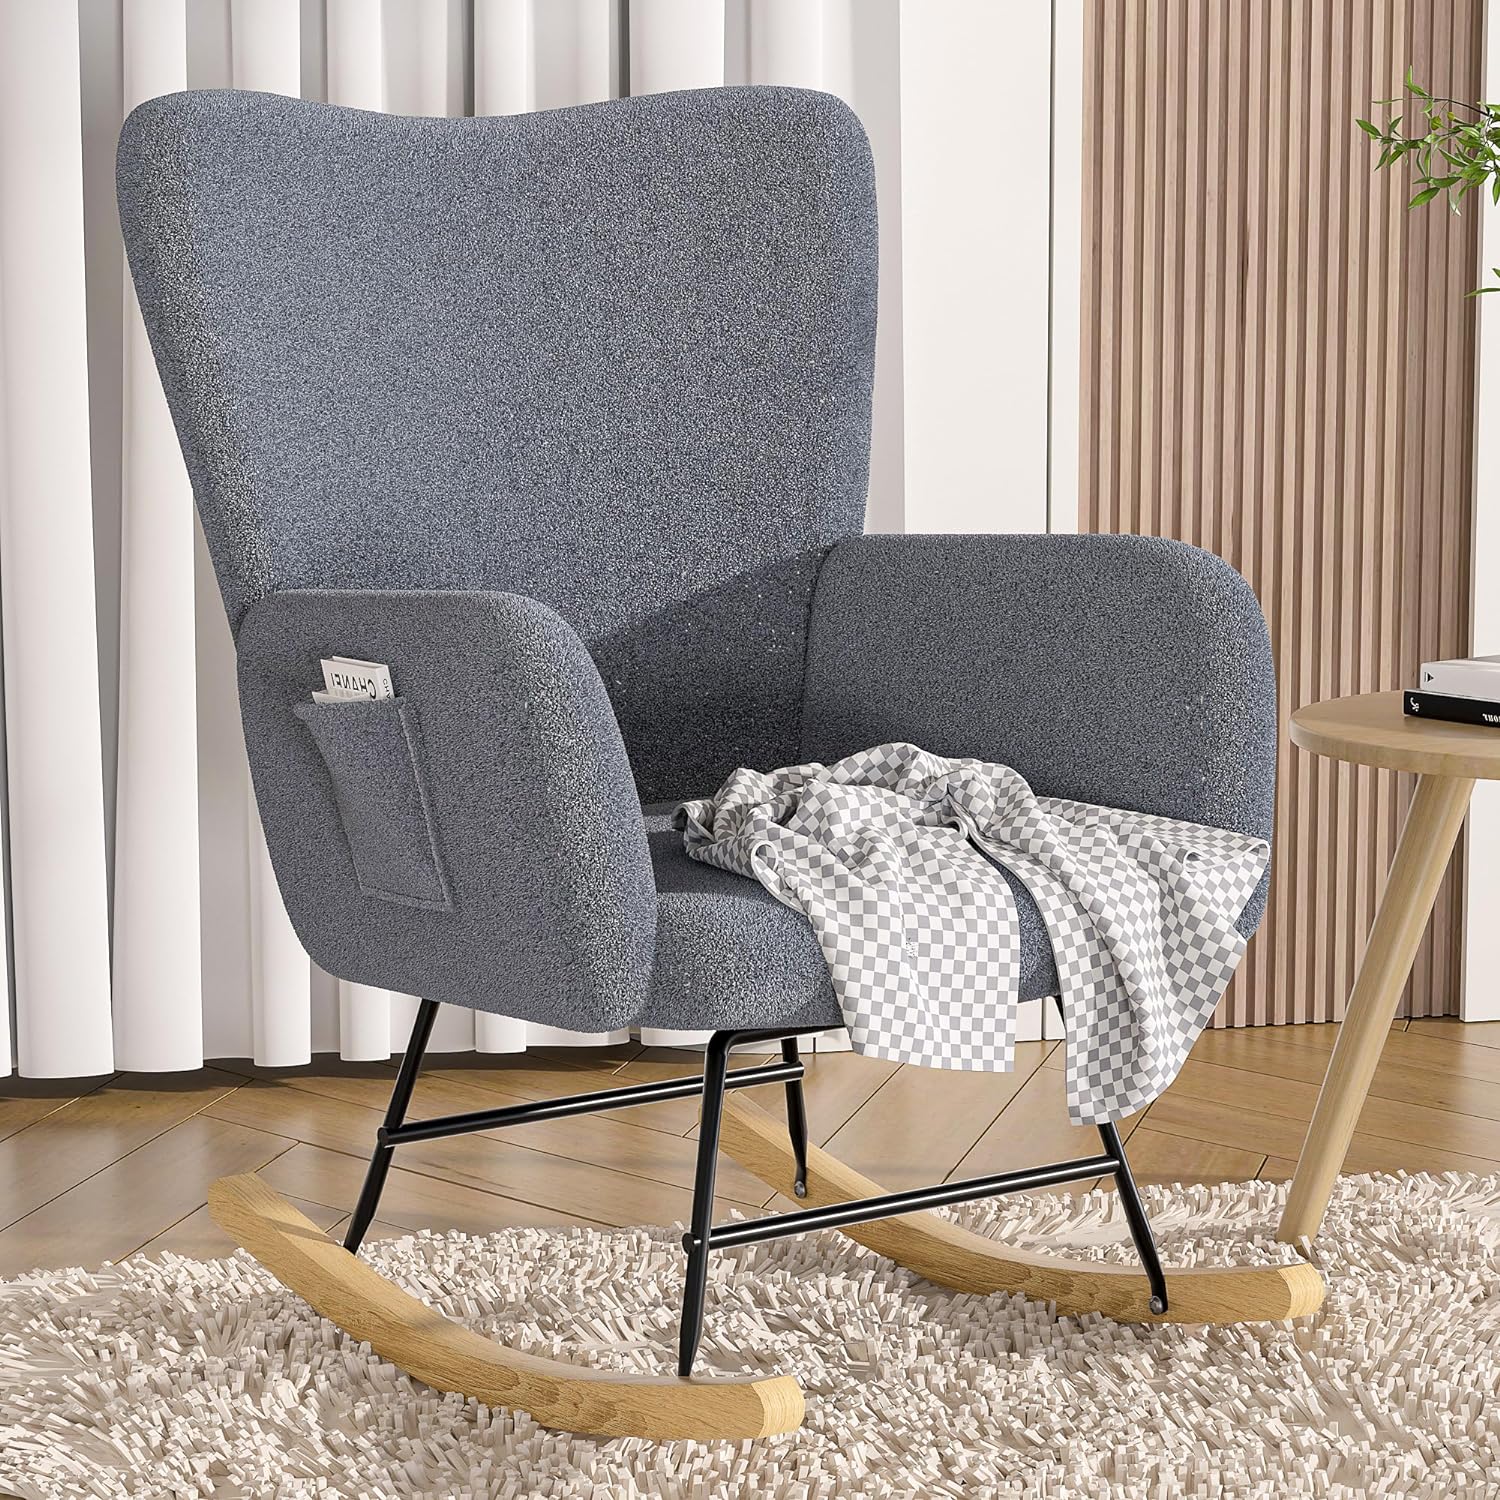 VECELO Rocking Chair, Modern Upholstered Teddy Fabric Nursery Glider with Padded Seat